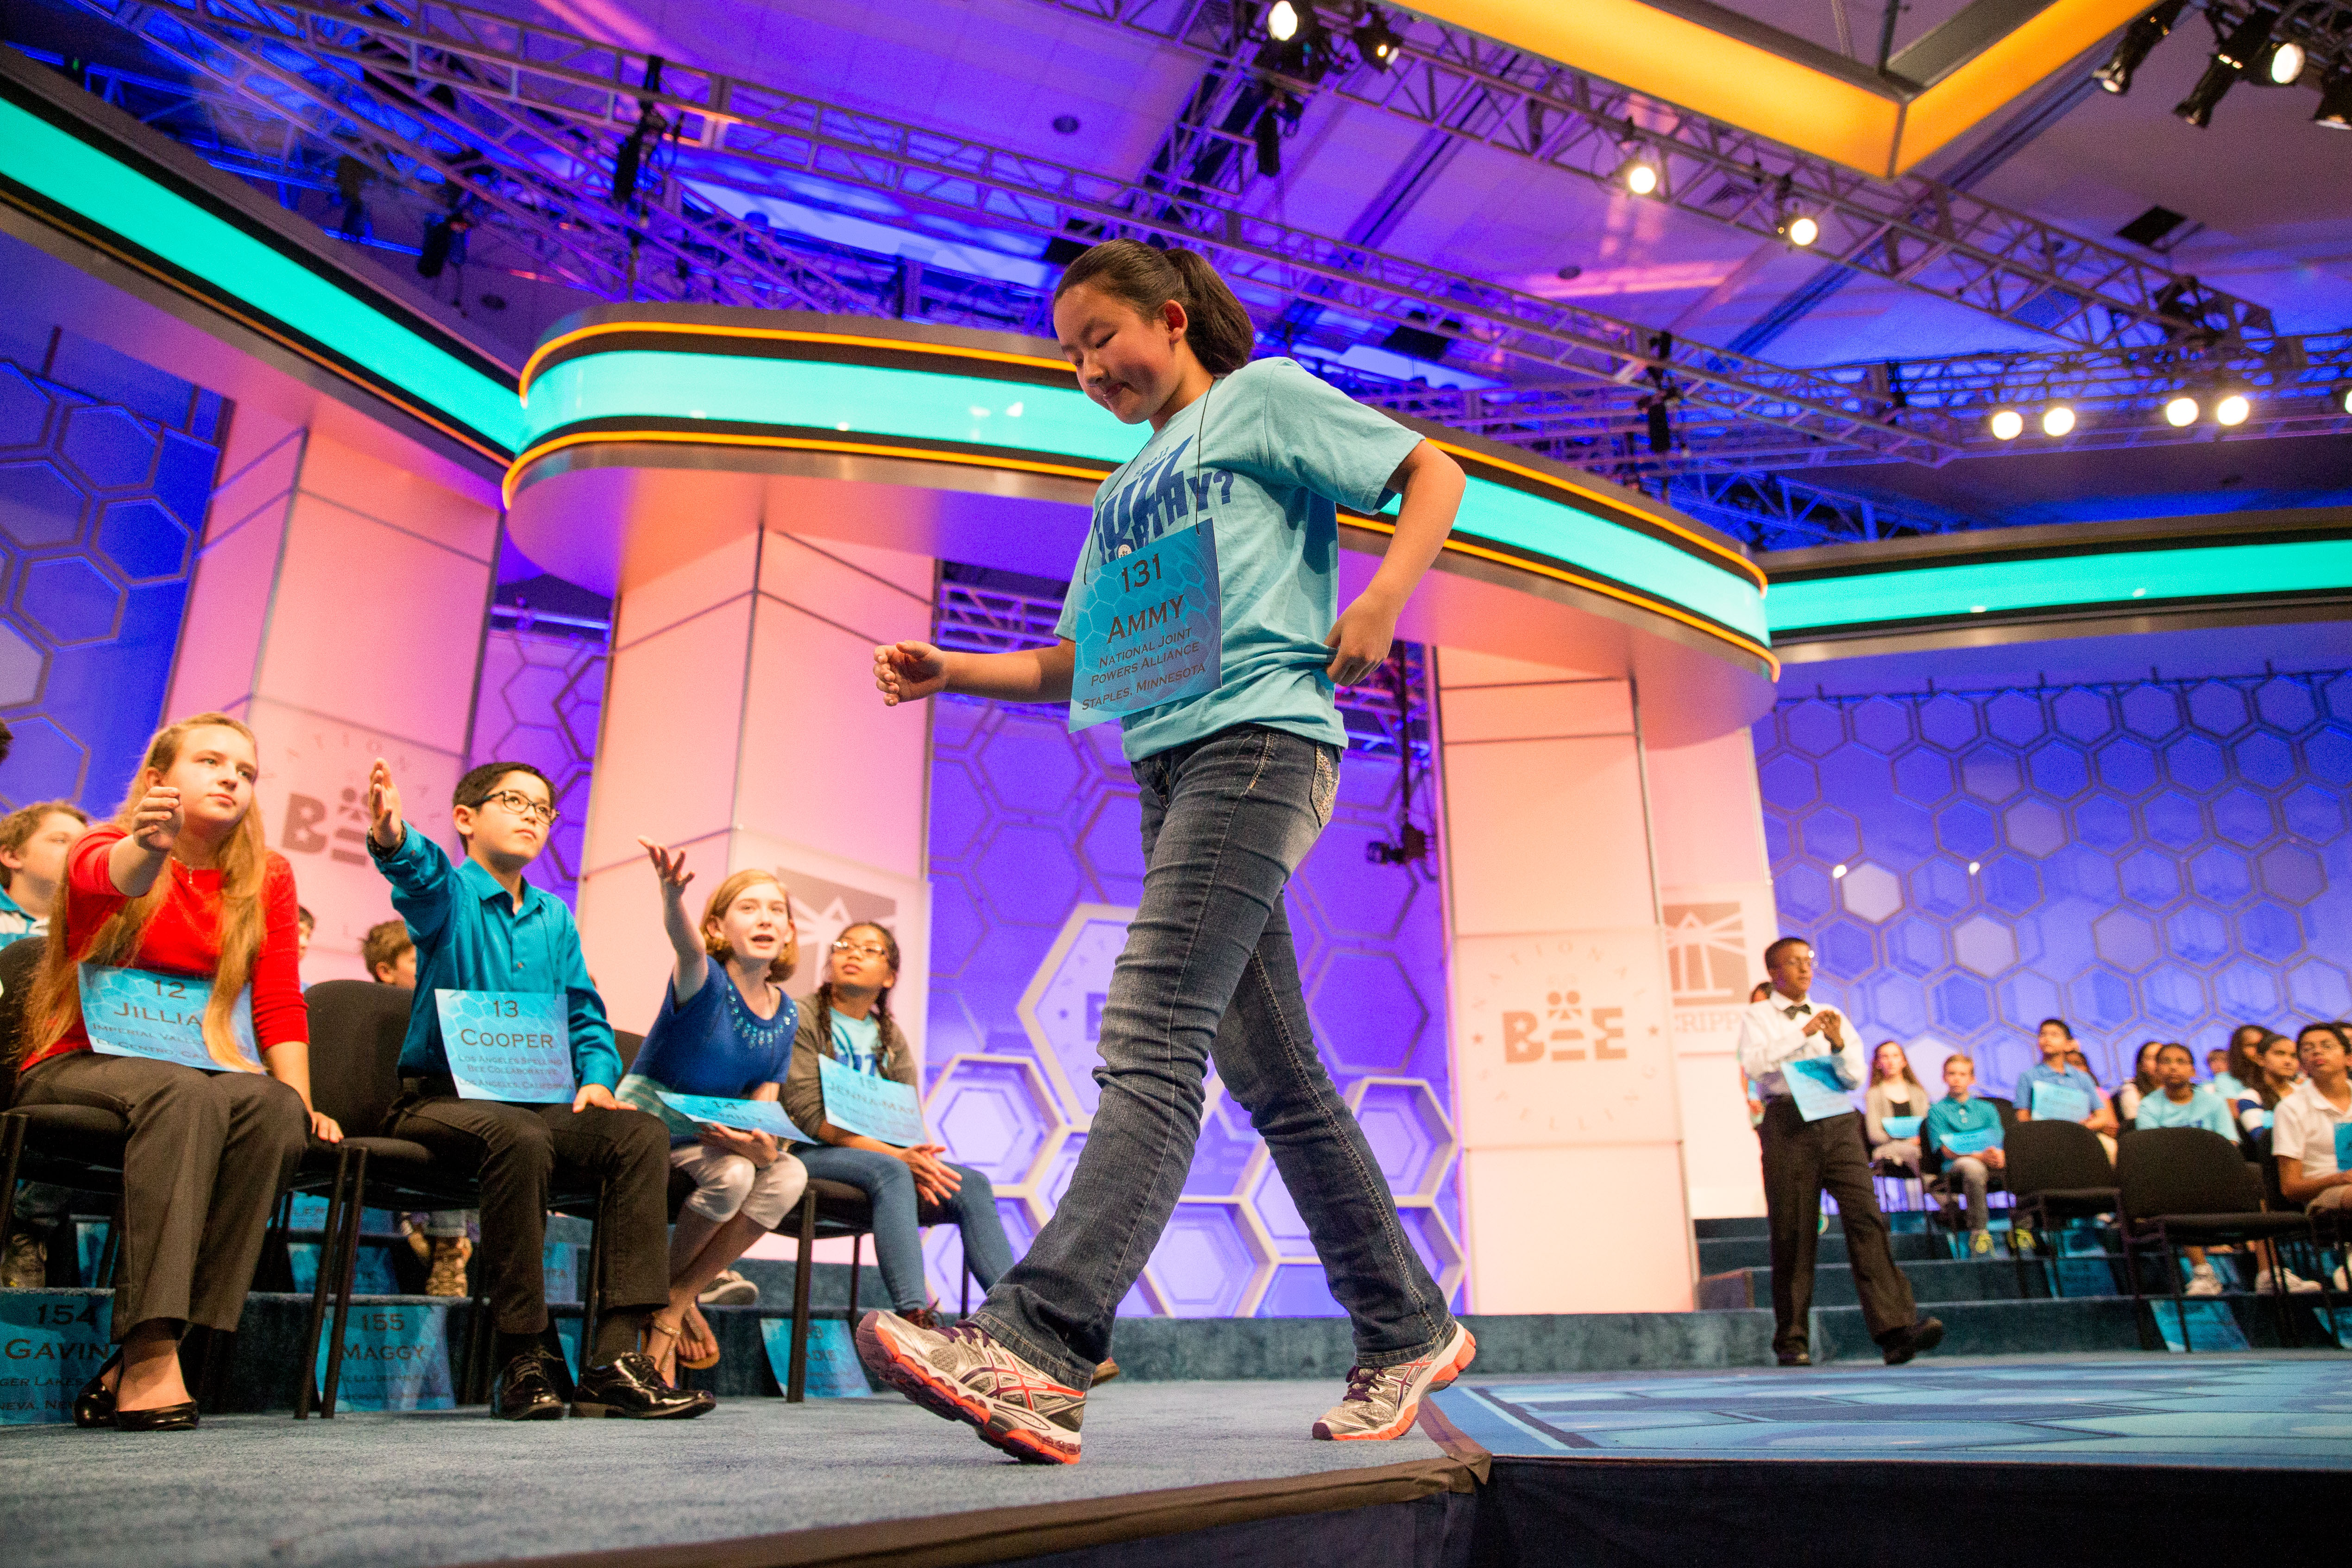 Ammy Lin, 12, of Staples, Minn. leaves the stage after incorrectly spelling "colocynth" during the 2015 Scripps National Spelling Bee, Wednesday, May 27, 2015, in Oxon Hill, Md. (AP Photo/Andrew Harnik)